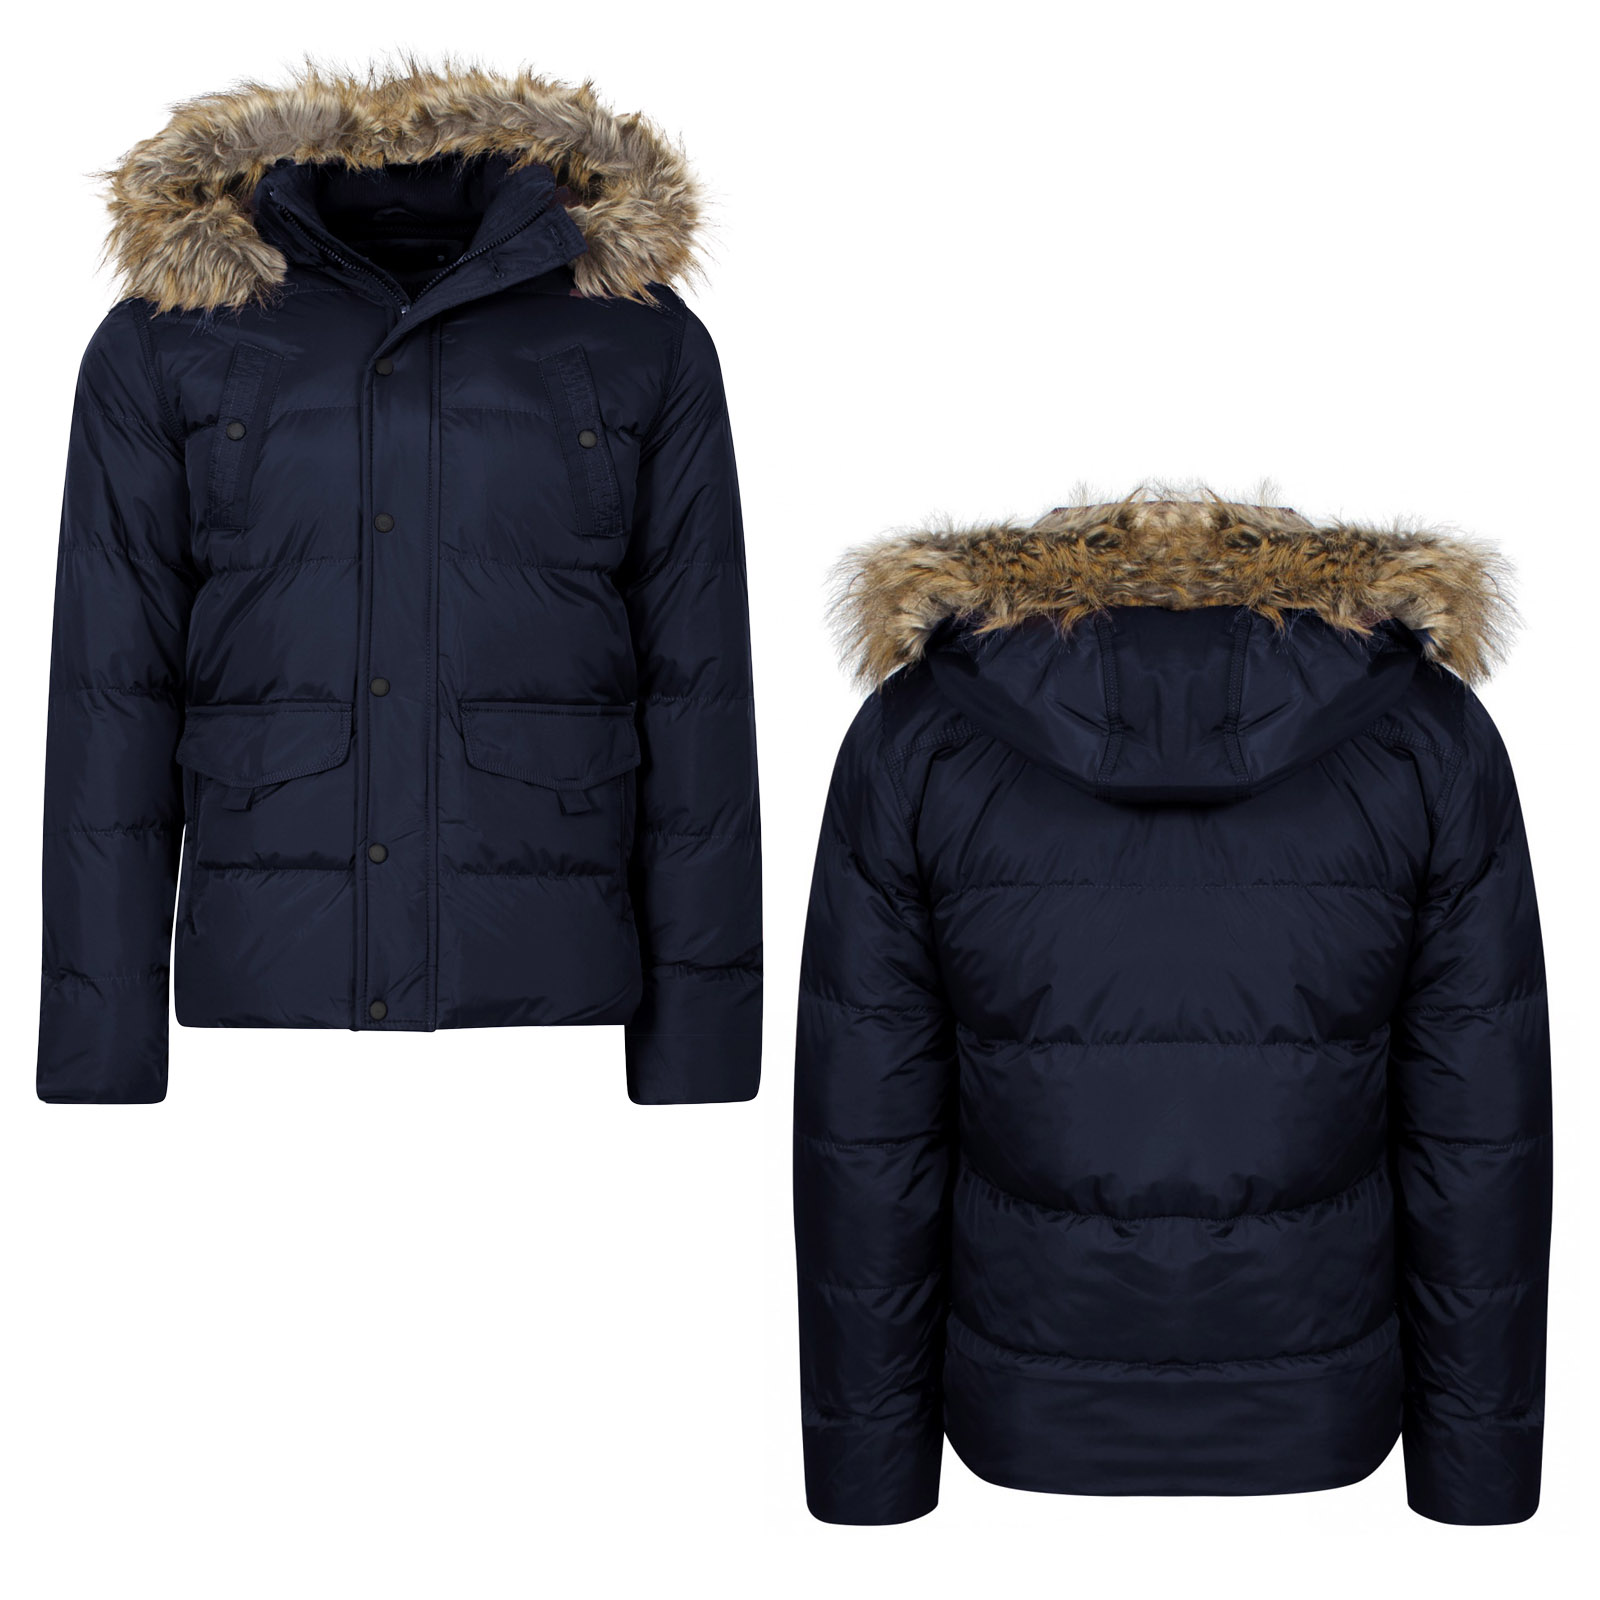 mens puffer jacket with fur hood - jackets in my home